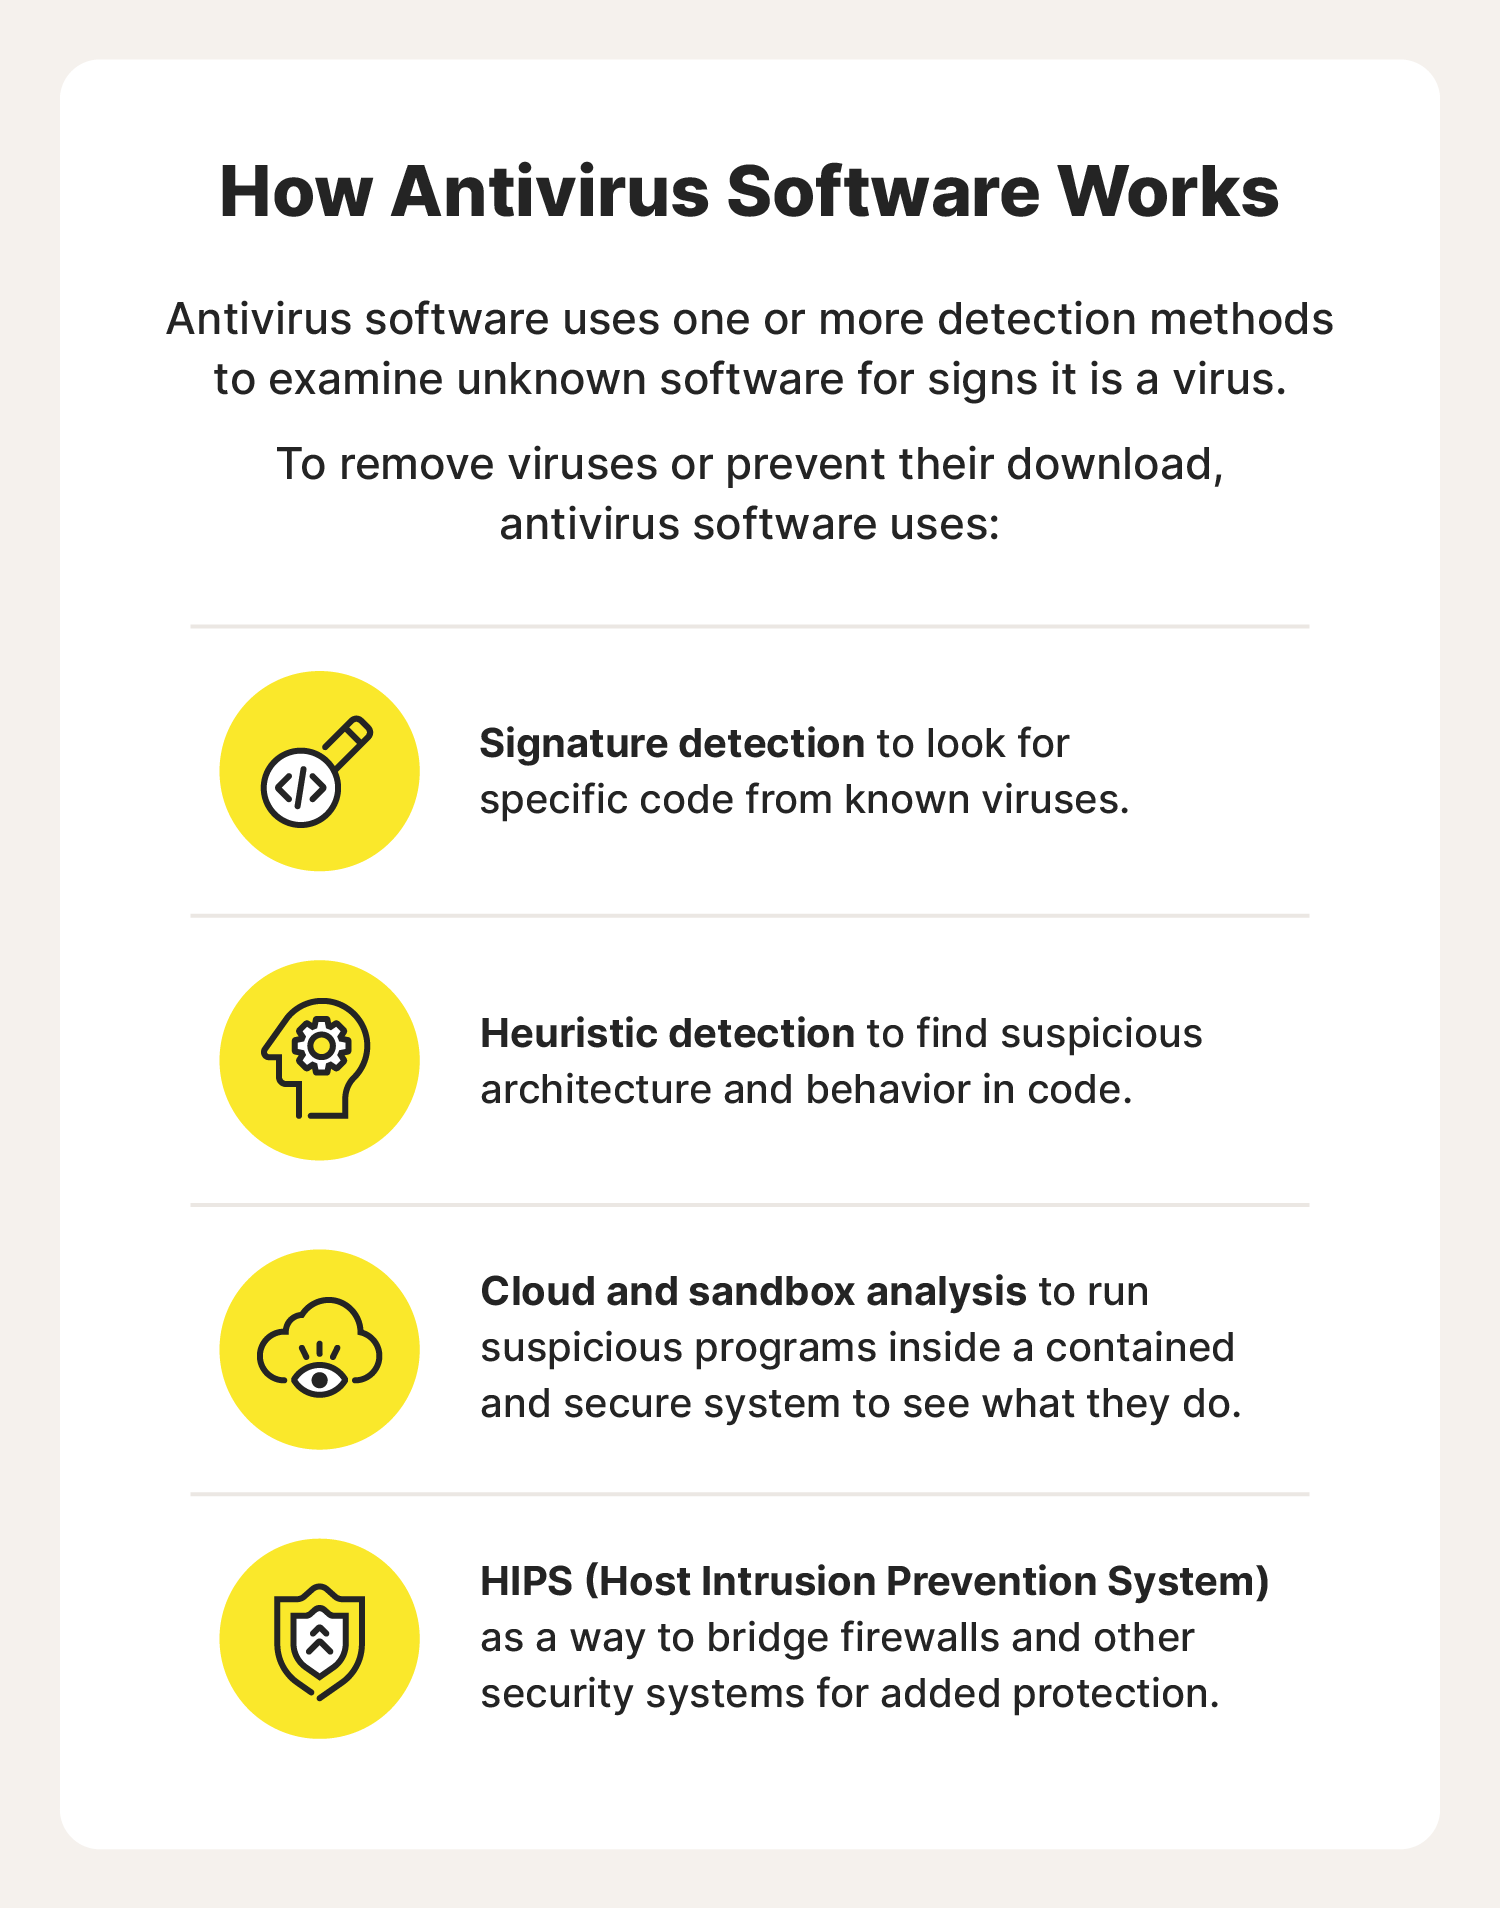 Illustrated chart featuring a breakdown of some of the detection methods used by antivirus software.